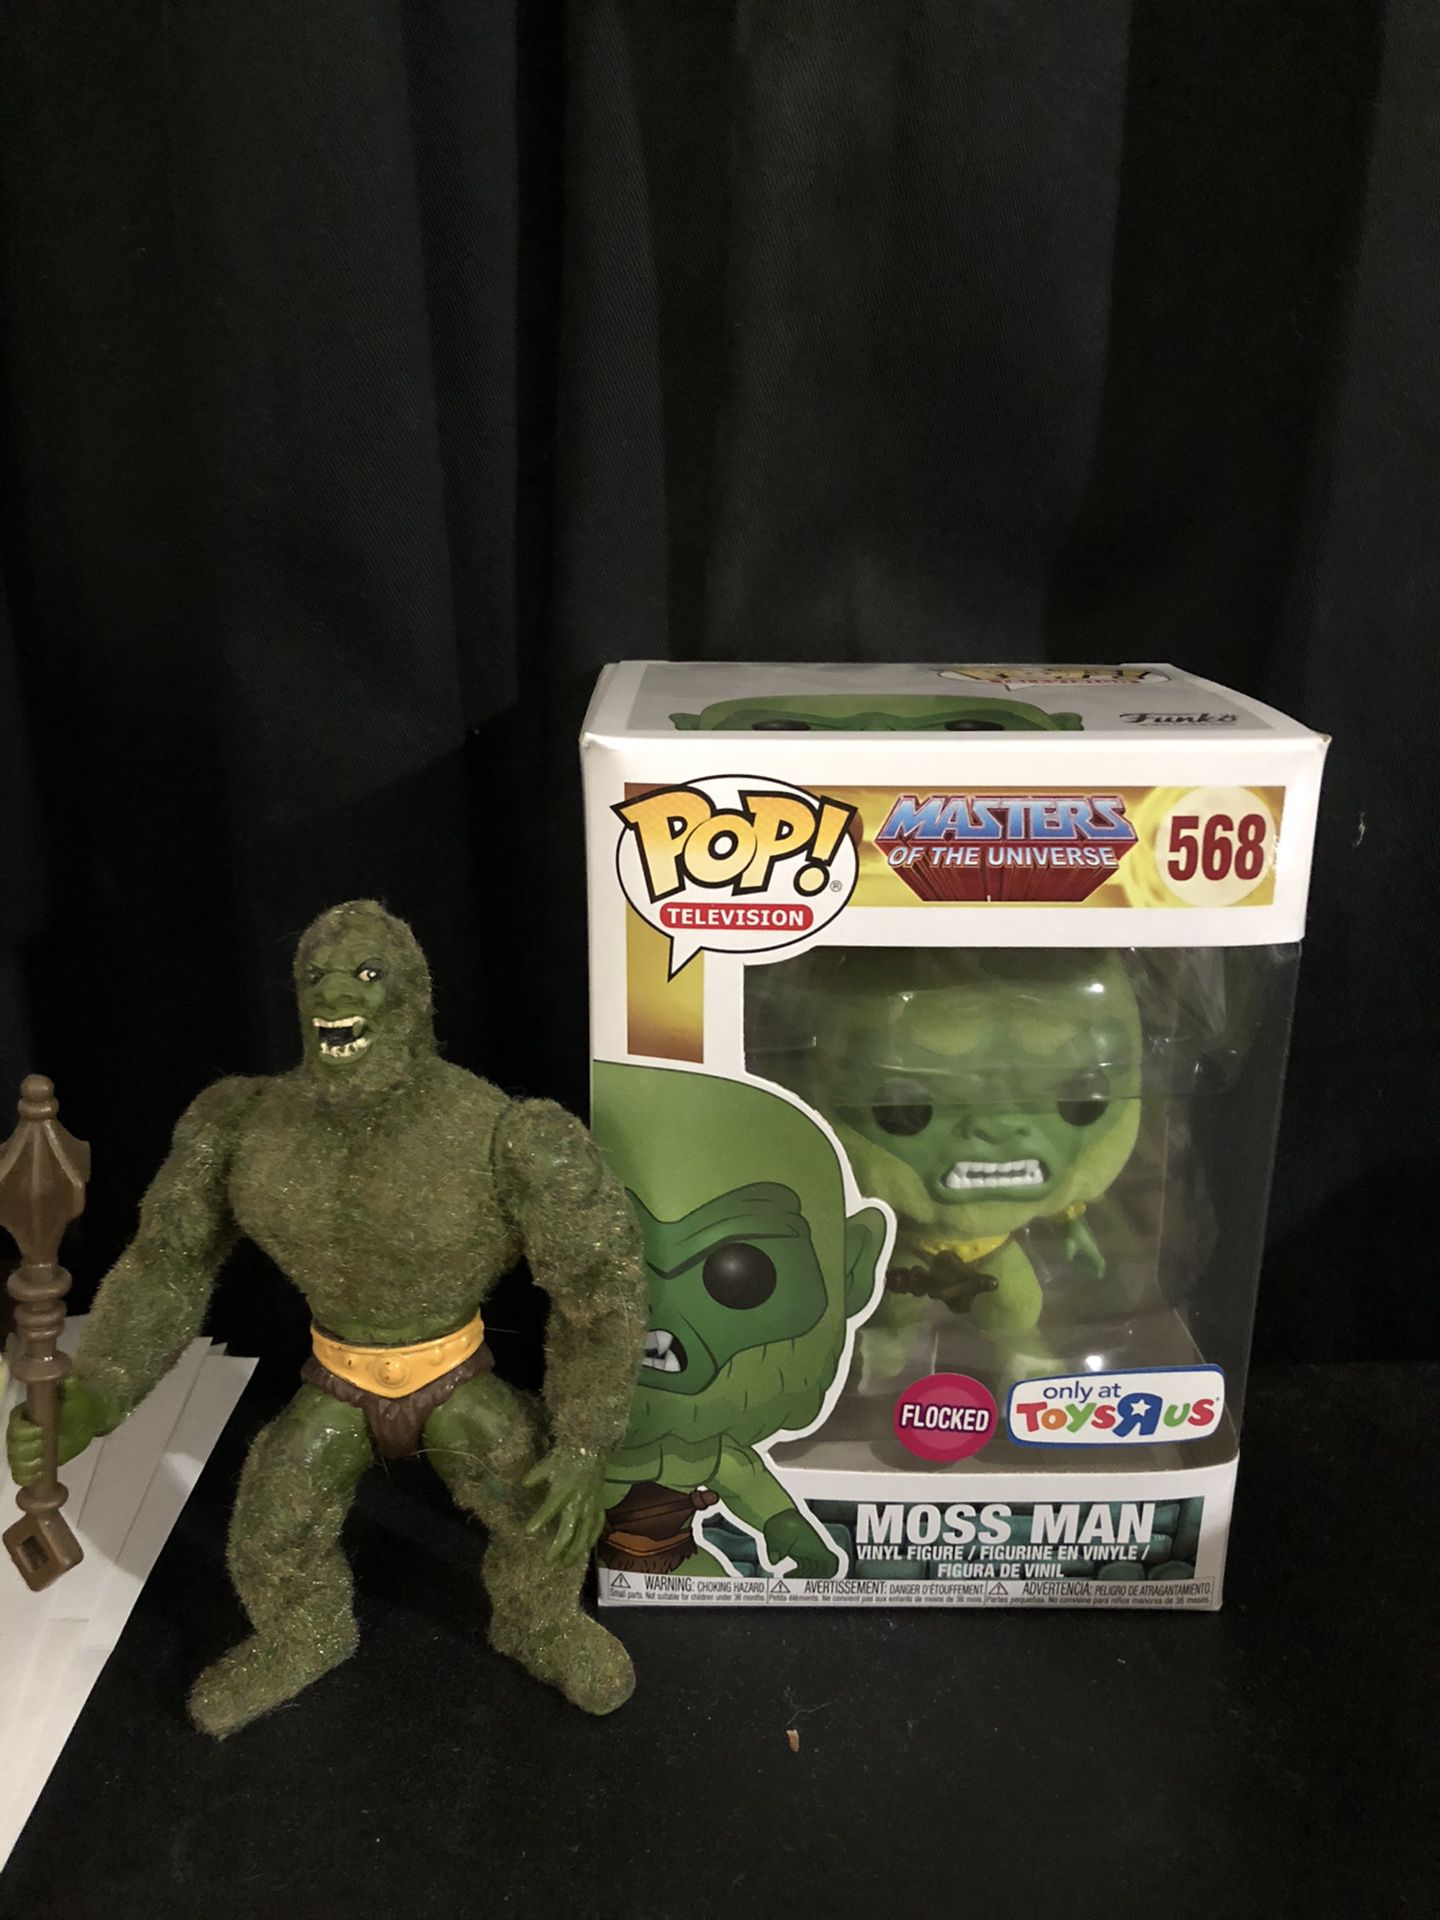 Moss man masters of the universe funko pop toys r us edition and vintage figure